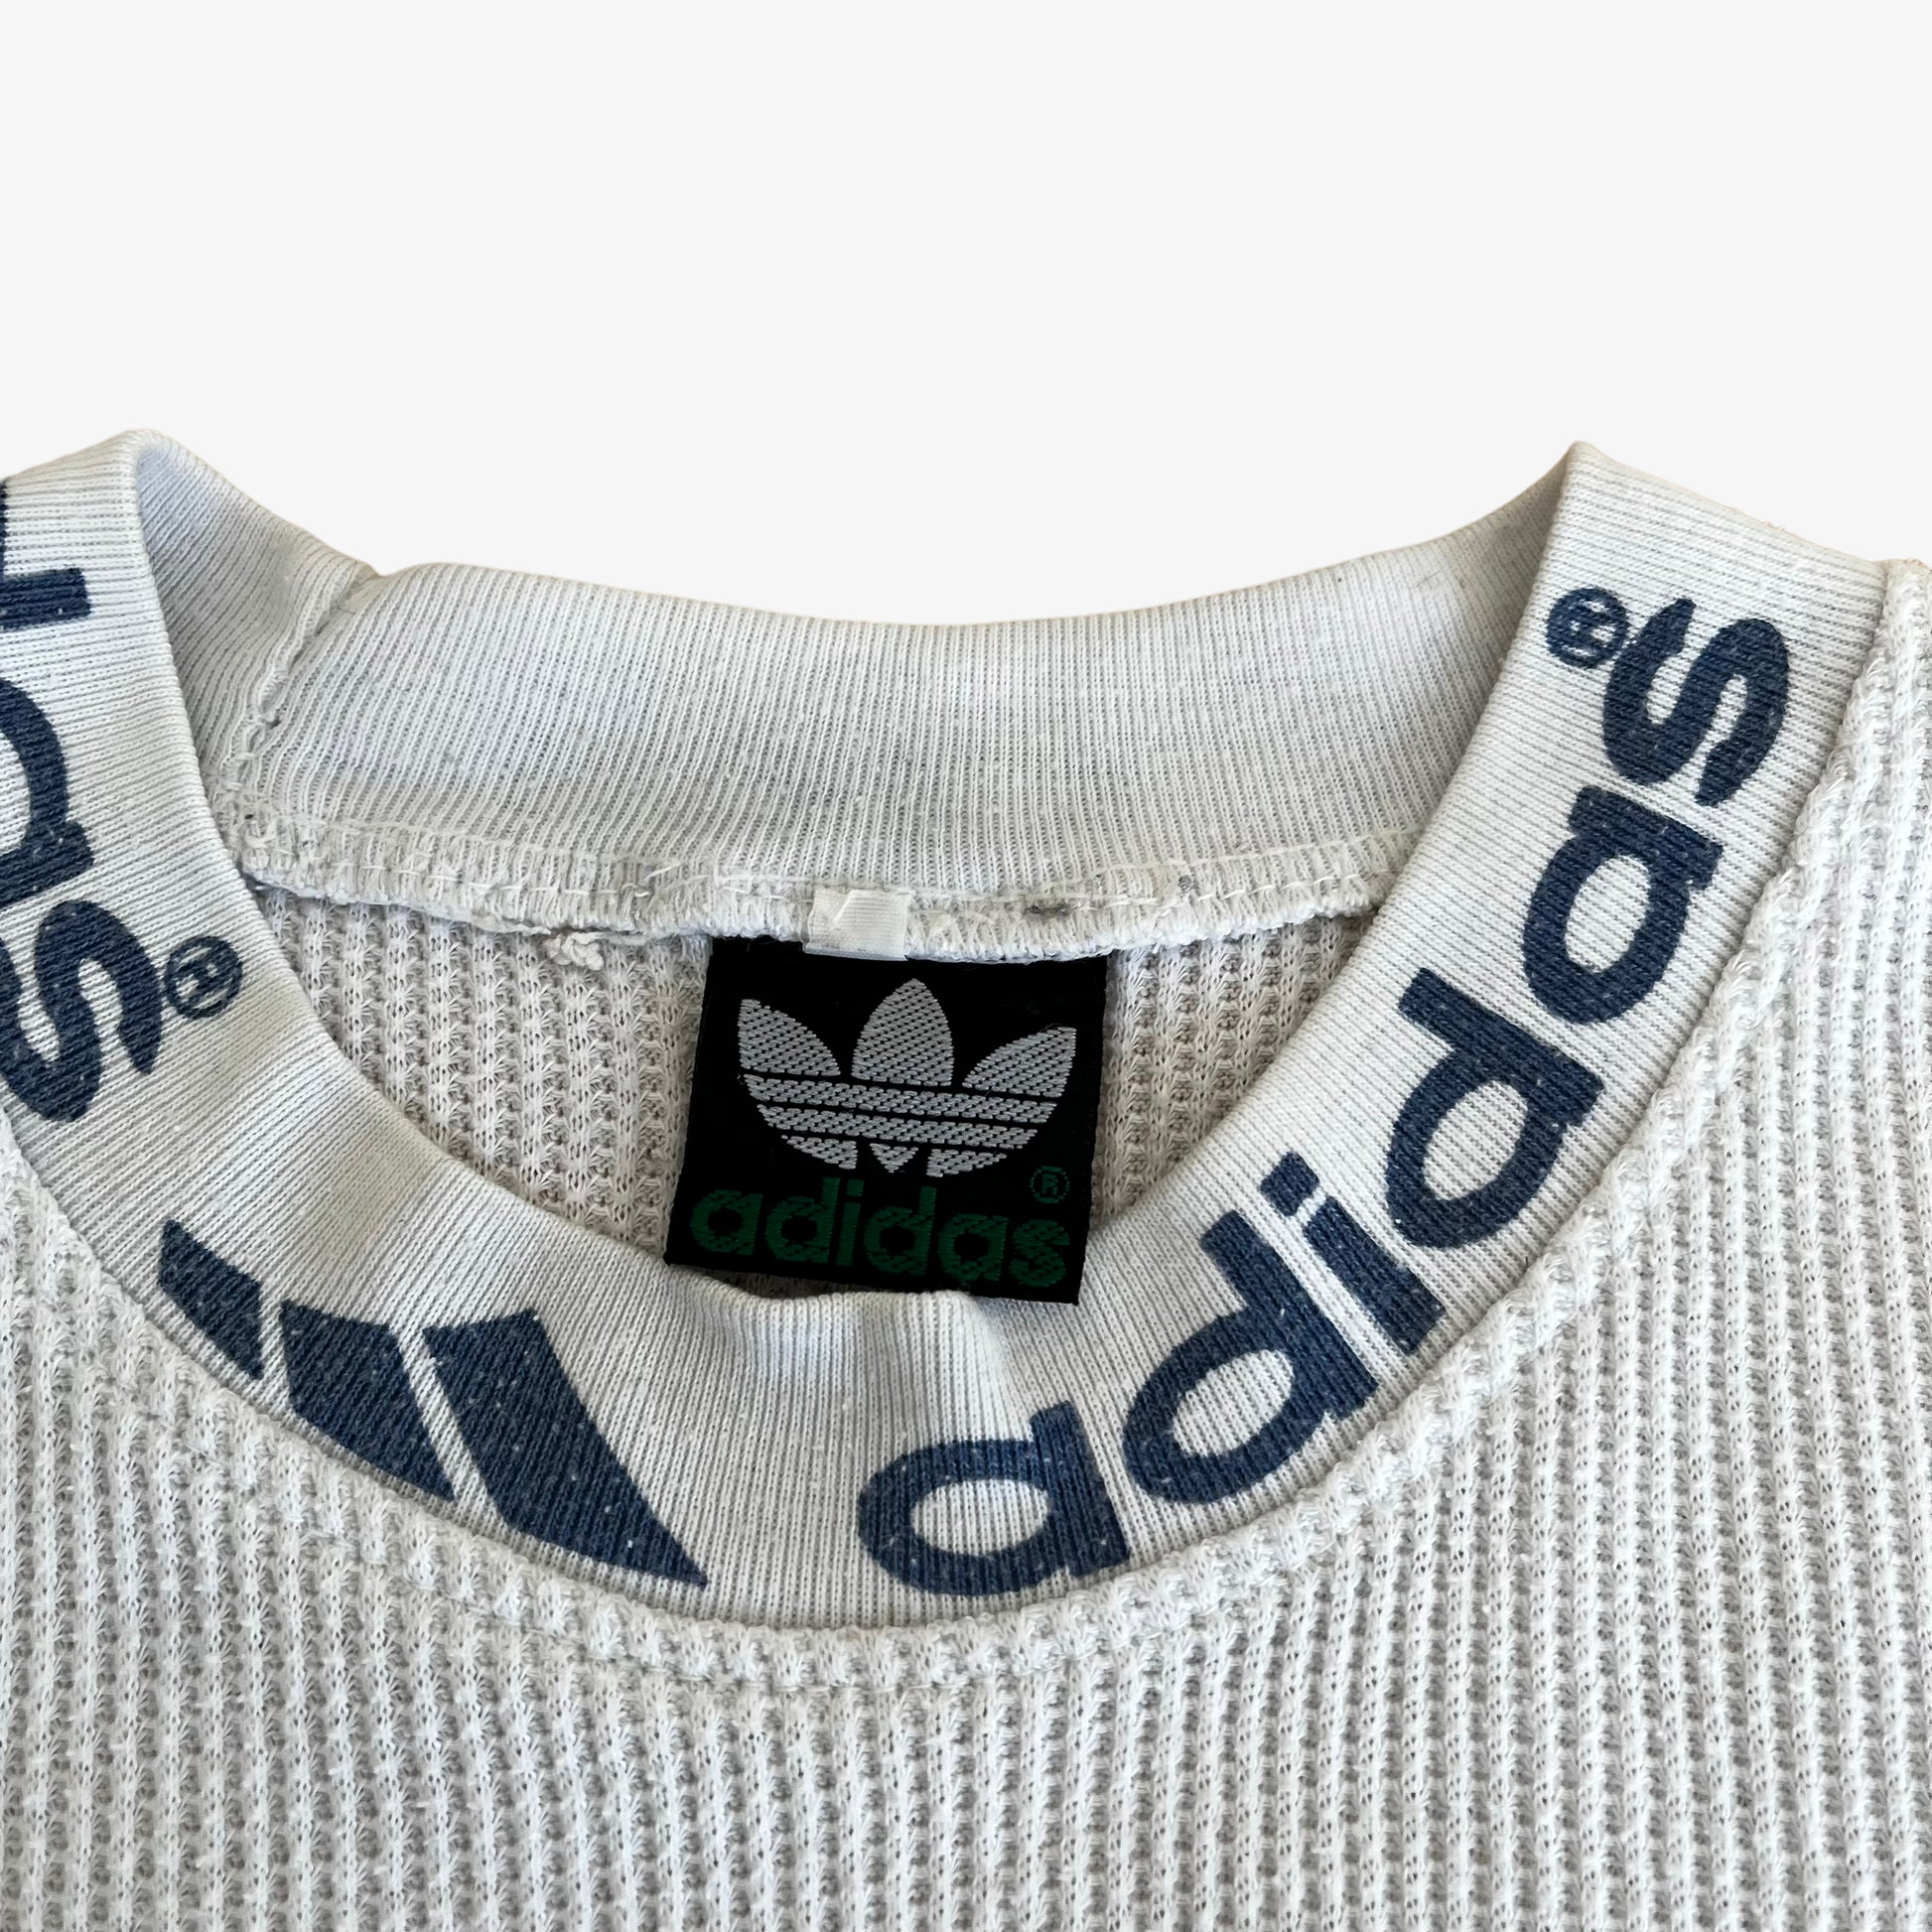 Vintage 90s Adidas All Over Print Spell Out Top Label - Casspios Dream